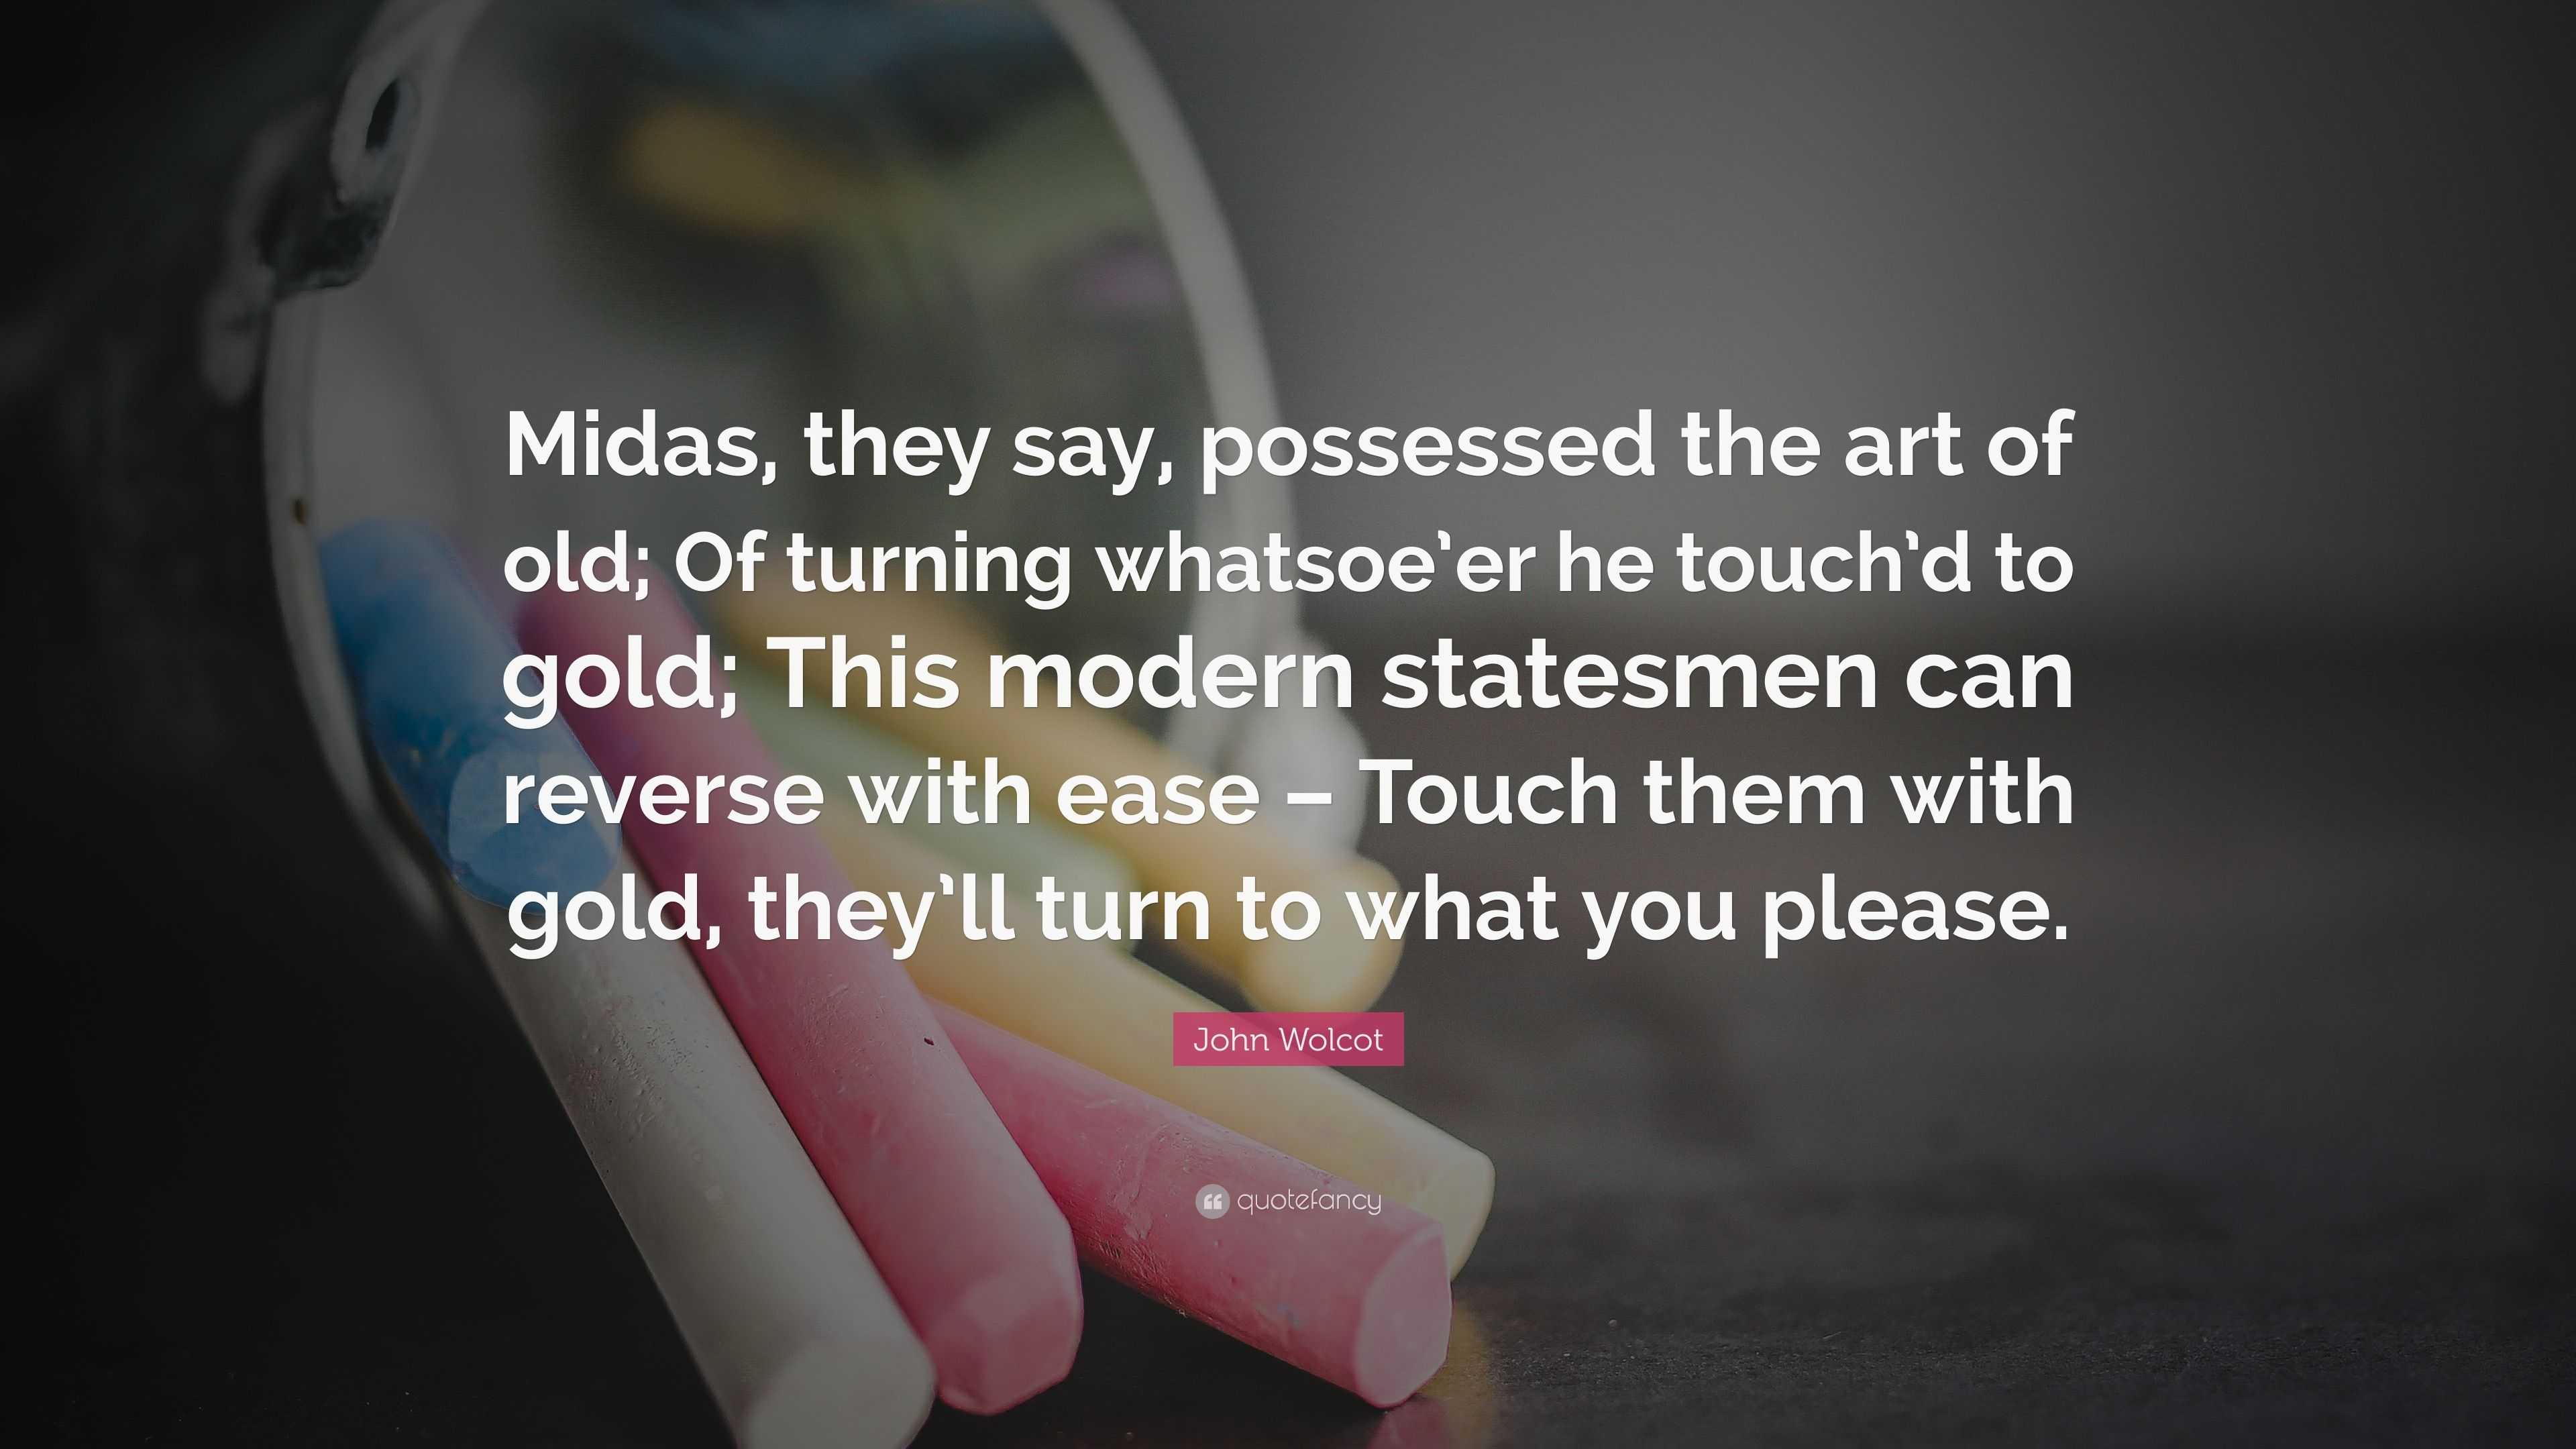 Top 31 Quotes About Midas: Famous Quotes & Sayings About Midas